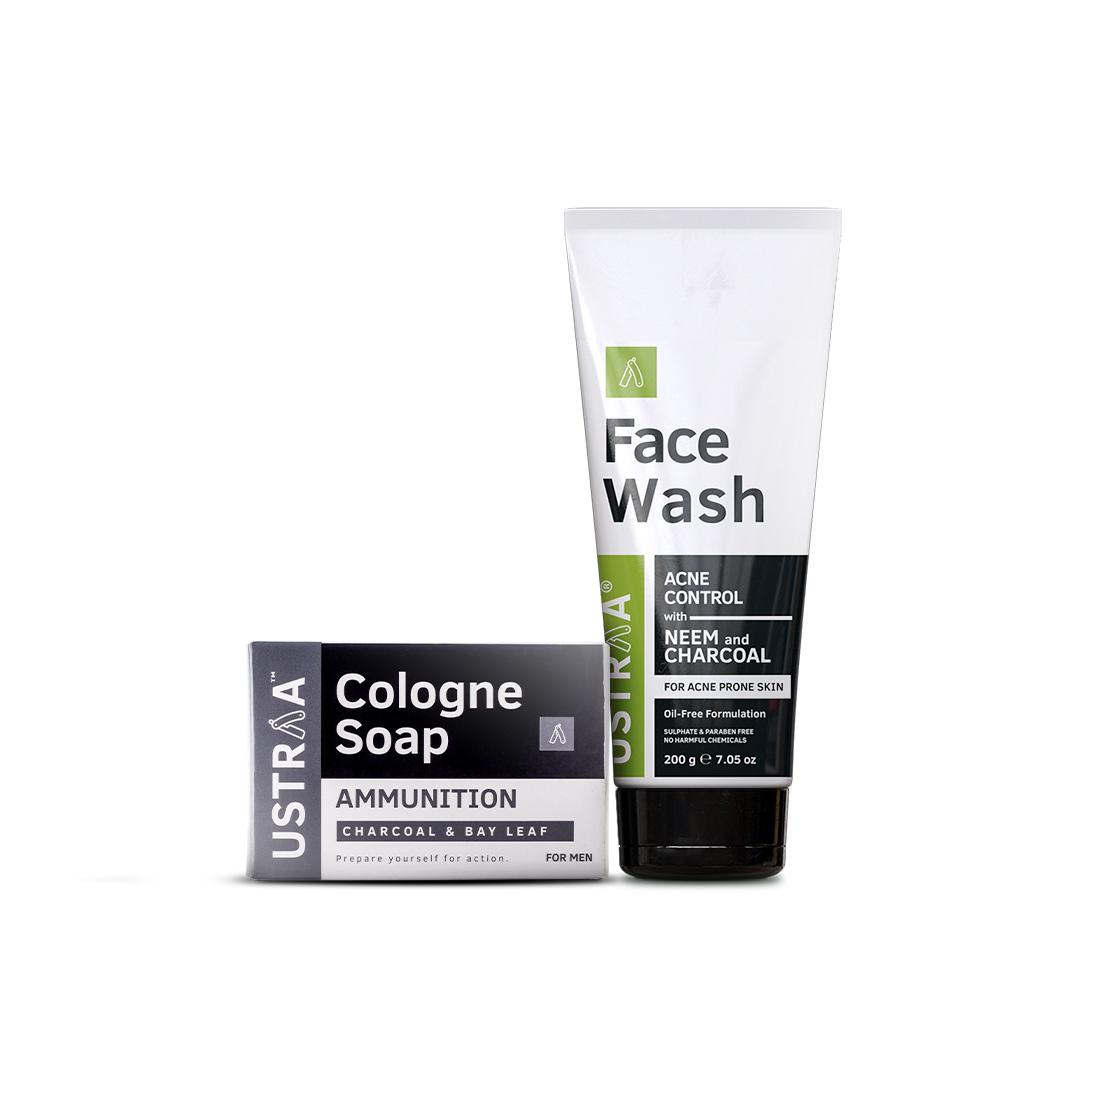 Face Wash Acne Control and Cologne Soap Ammunition